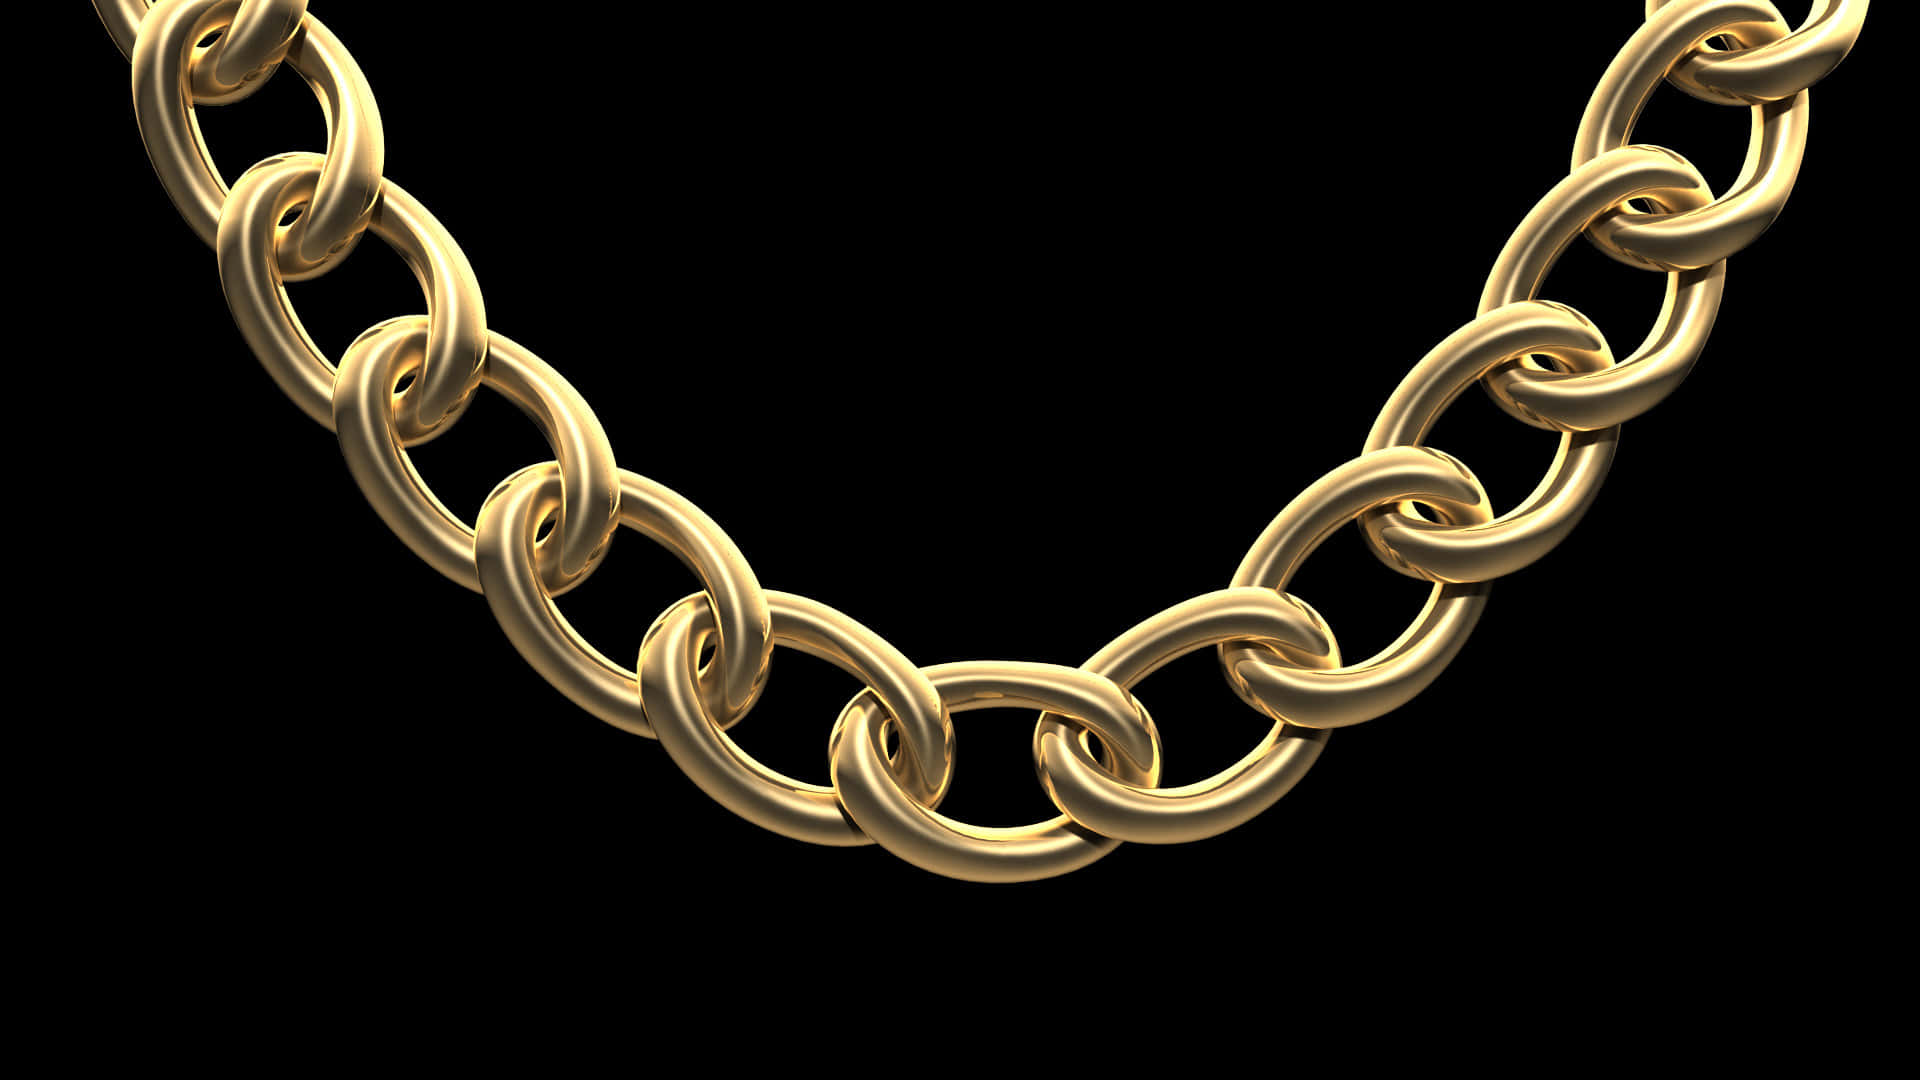 500 Chain Pictures  Download Free Images on Unsplash